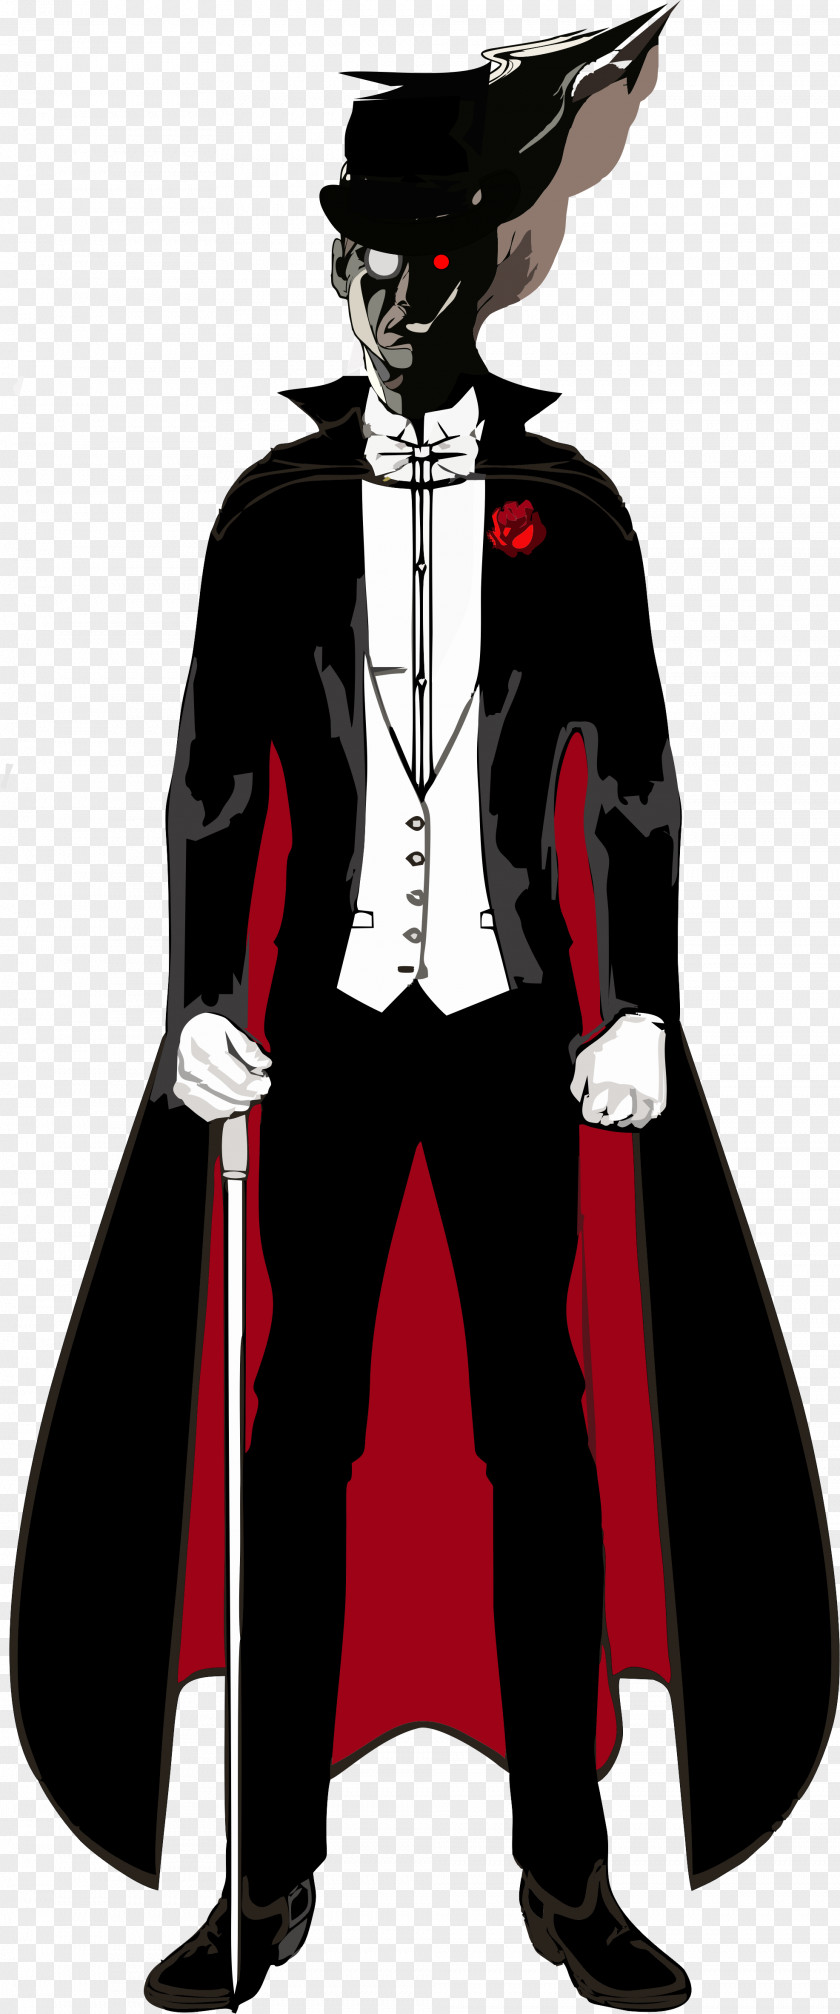 L'aiguille Creuse The Hollow Needle 괴도 루팡 Arsène Lupin Costume Design PNG